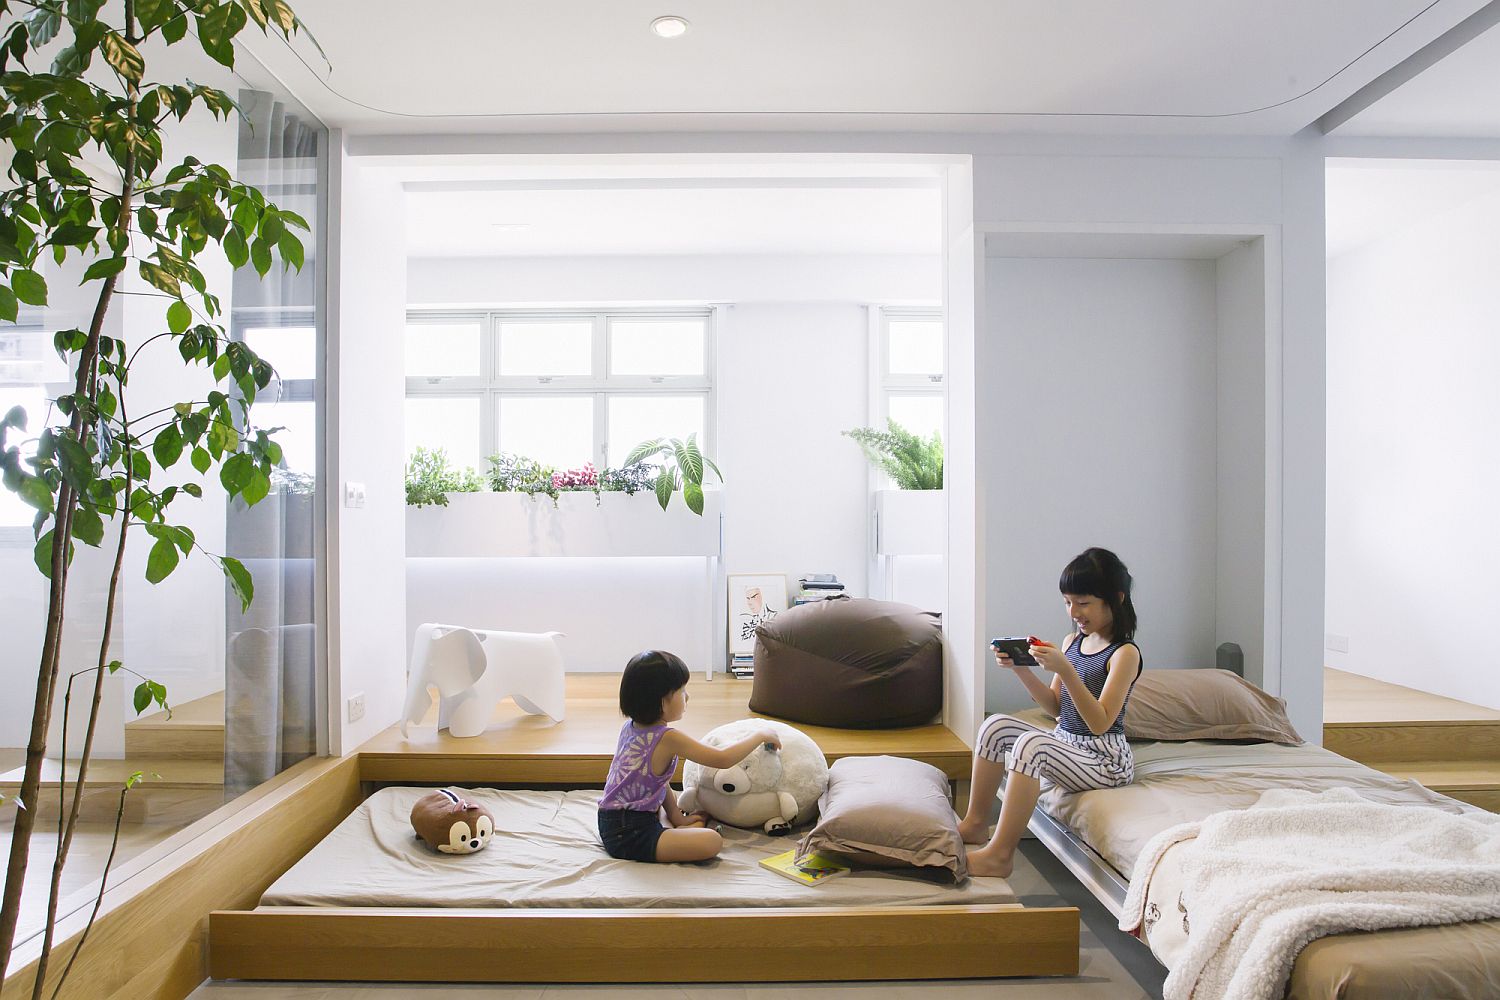 Trundle-bed-under-the-wooden-floor-can-be-pulled-out-to-create-guest-area-and-playroom